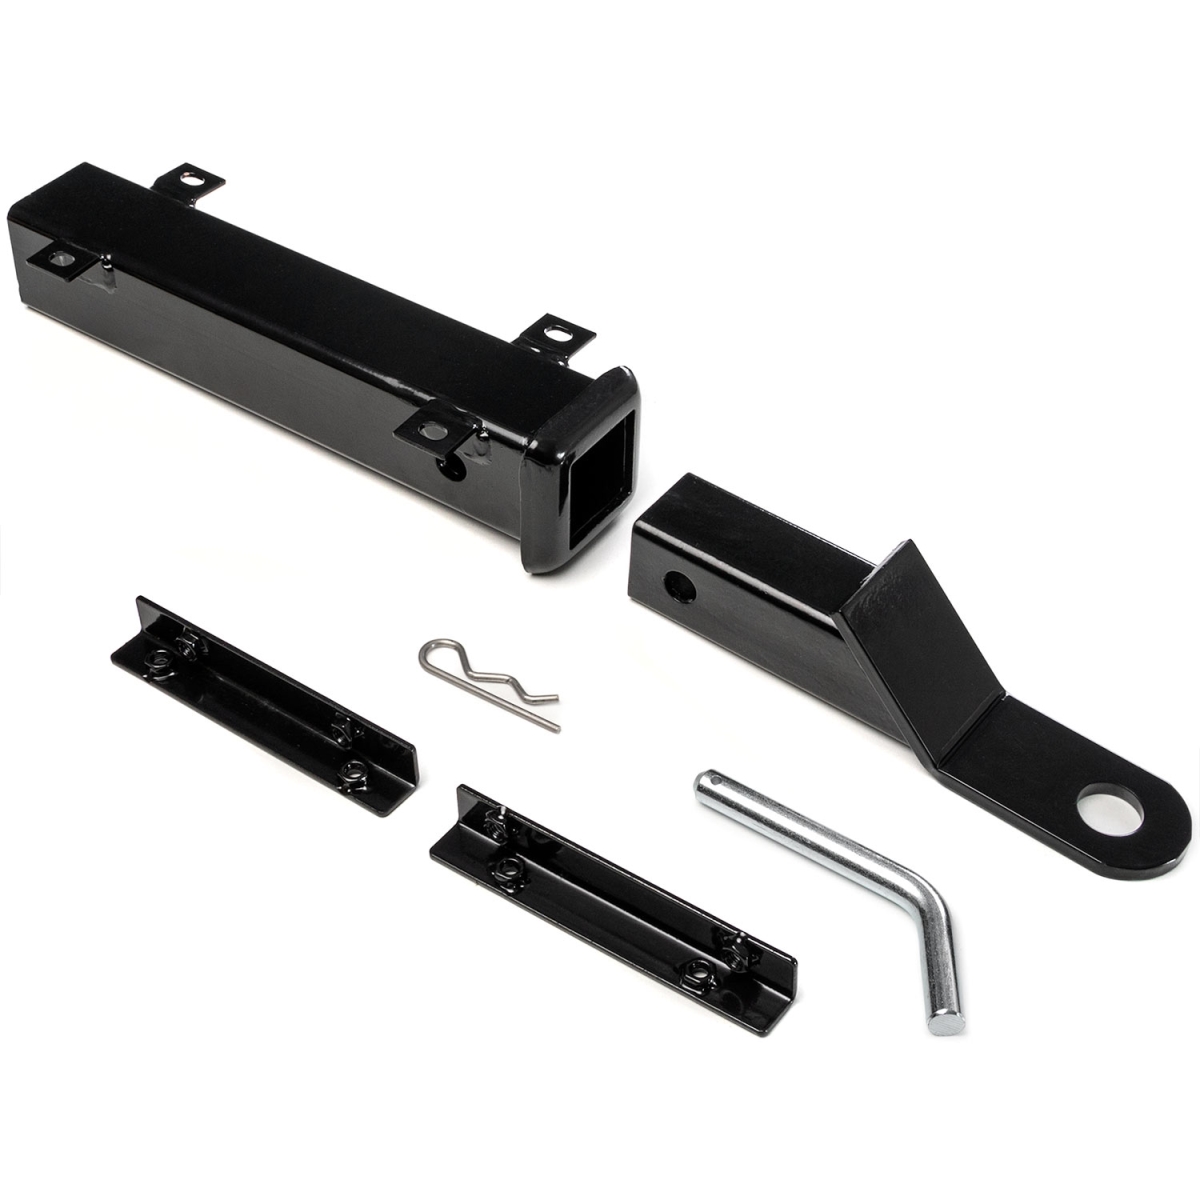 SSE-4790 2 in. Golf Cart Universal Rear Seat Trailer Hitch with Receiver for Step on Back of Golf Cart, Black -  Kapsco Moto